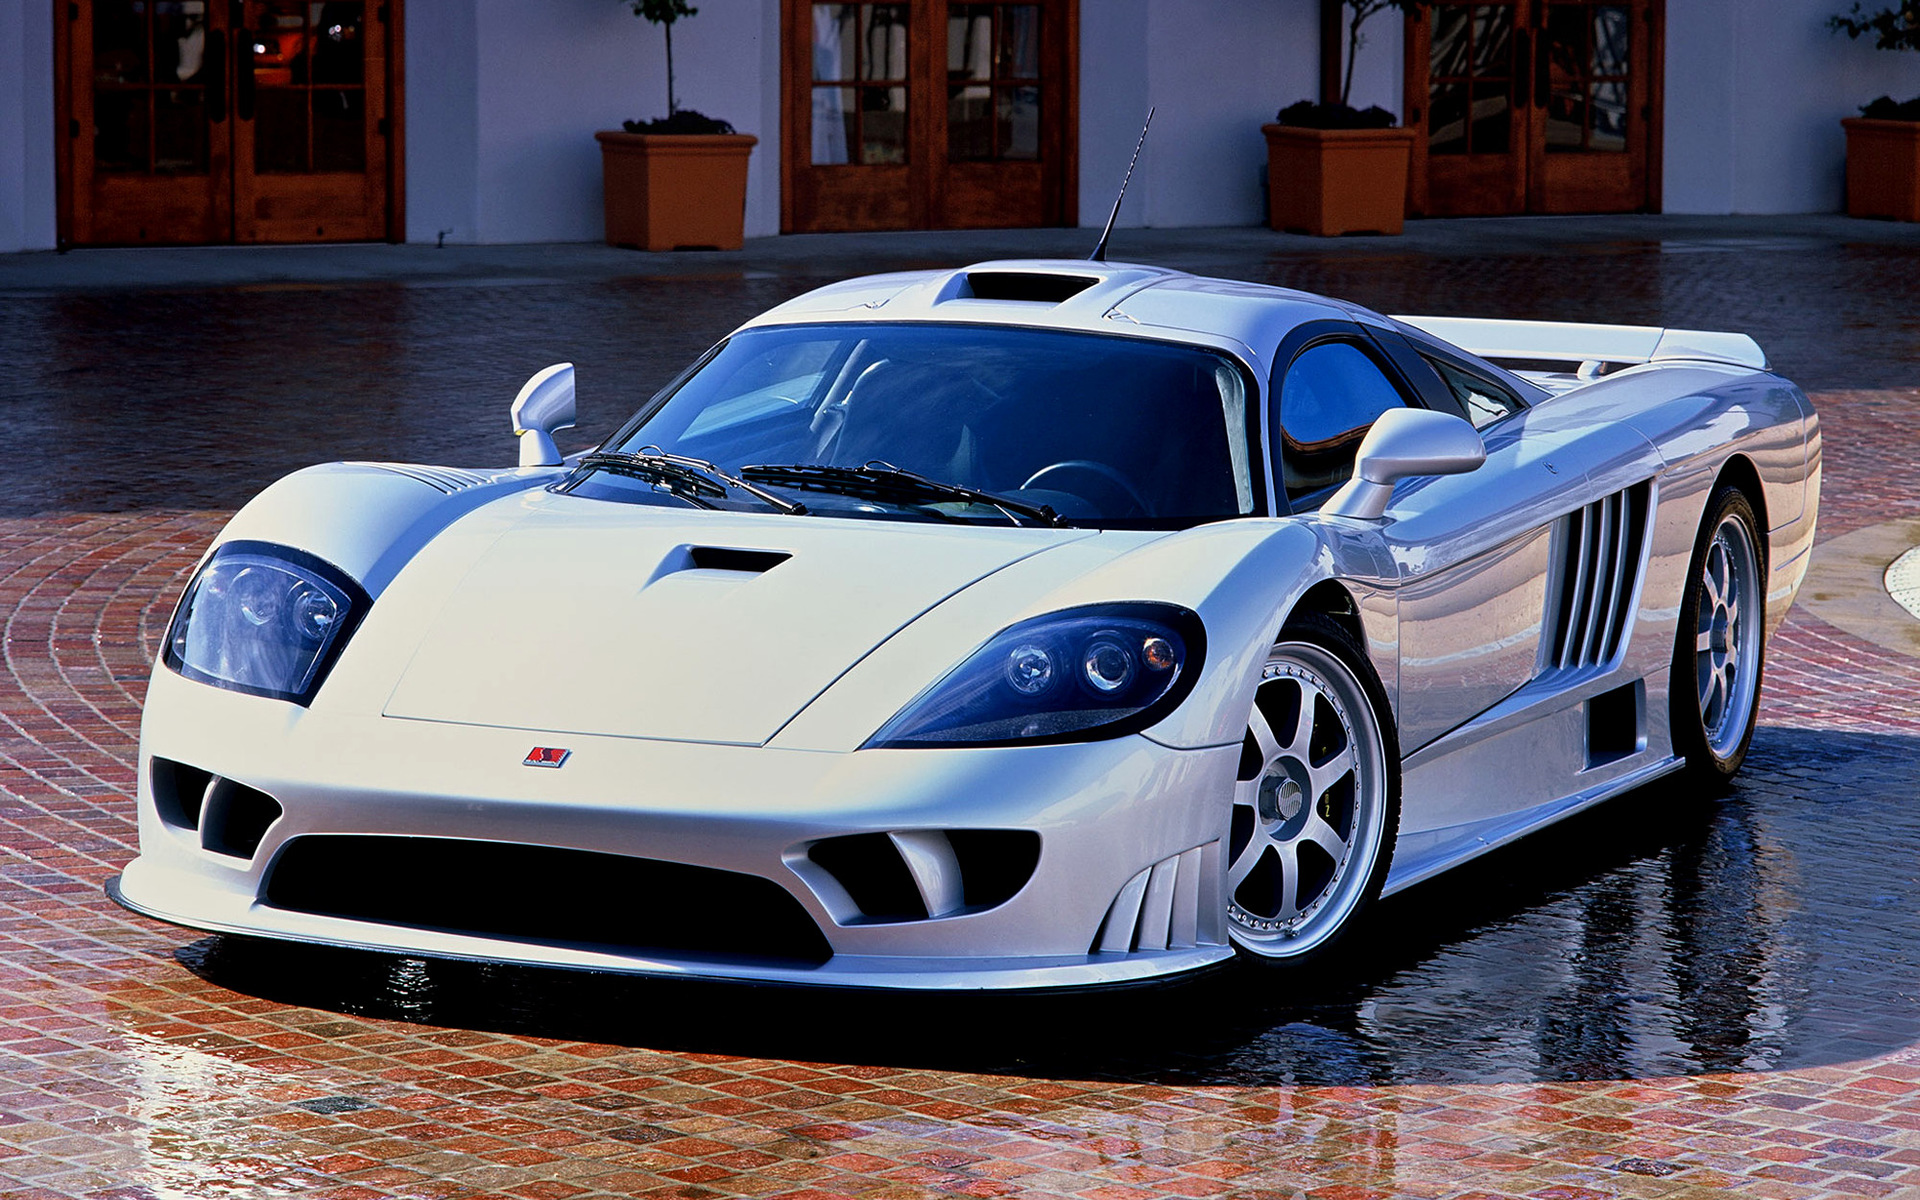 The Most Powerful Cars of All-Time